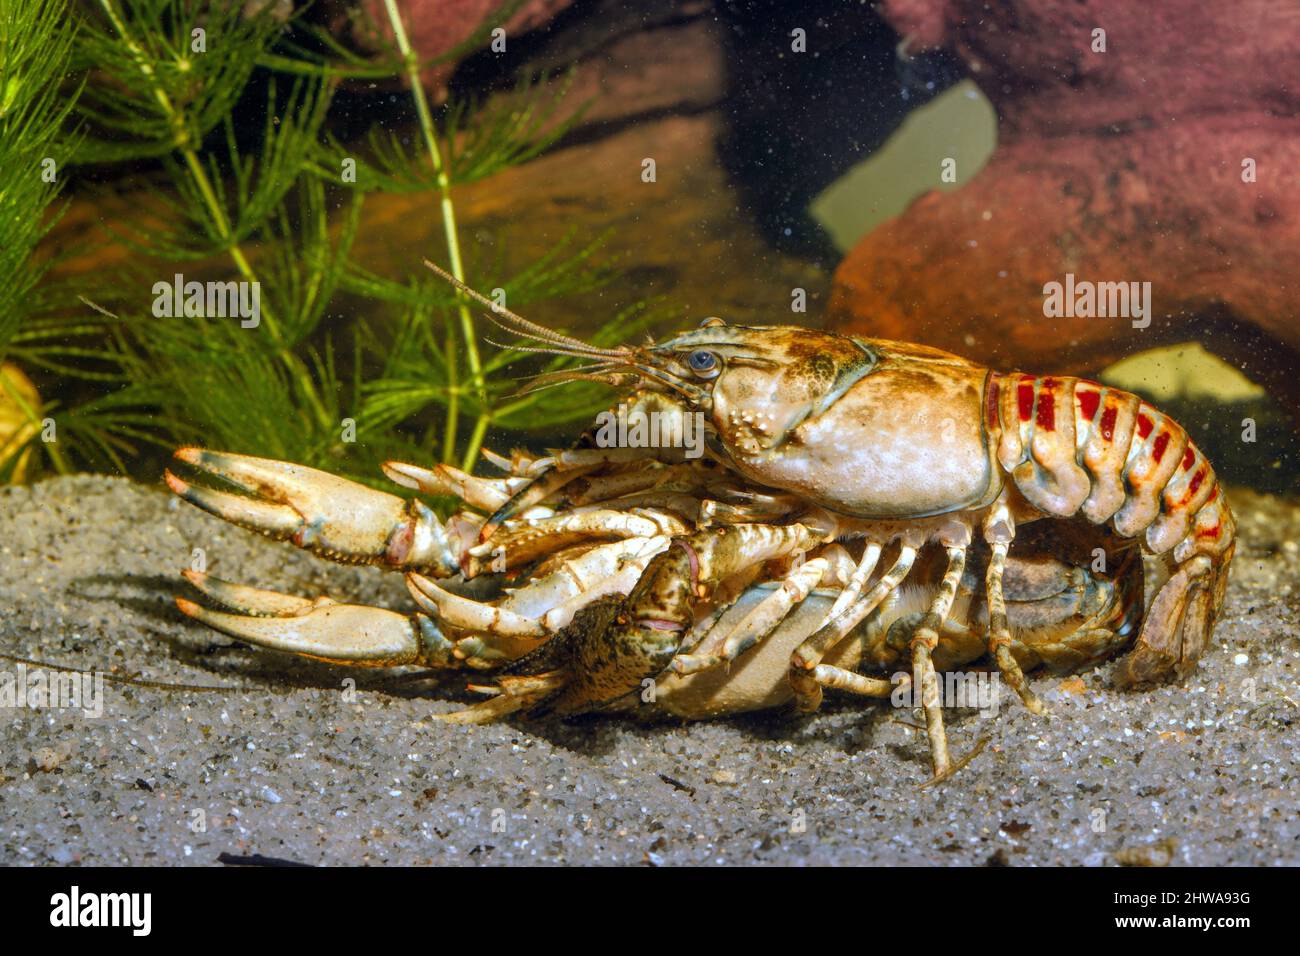 Spinycheek crayfish, American crayfish, American river crayfish, Striped crayfish (Orconectes limosus, Cambarus affinis), mating, side view, Germany, Stock Photo